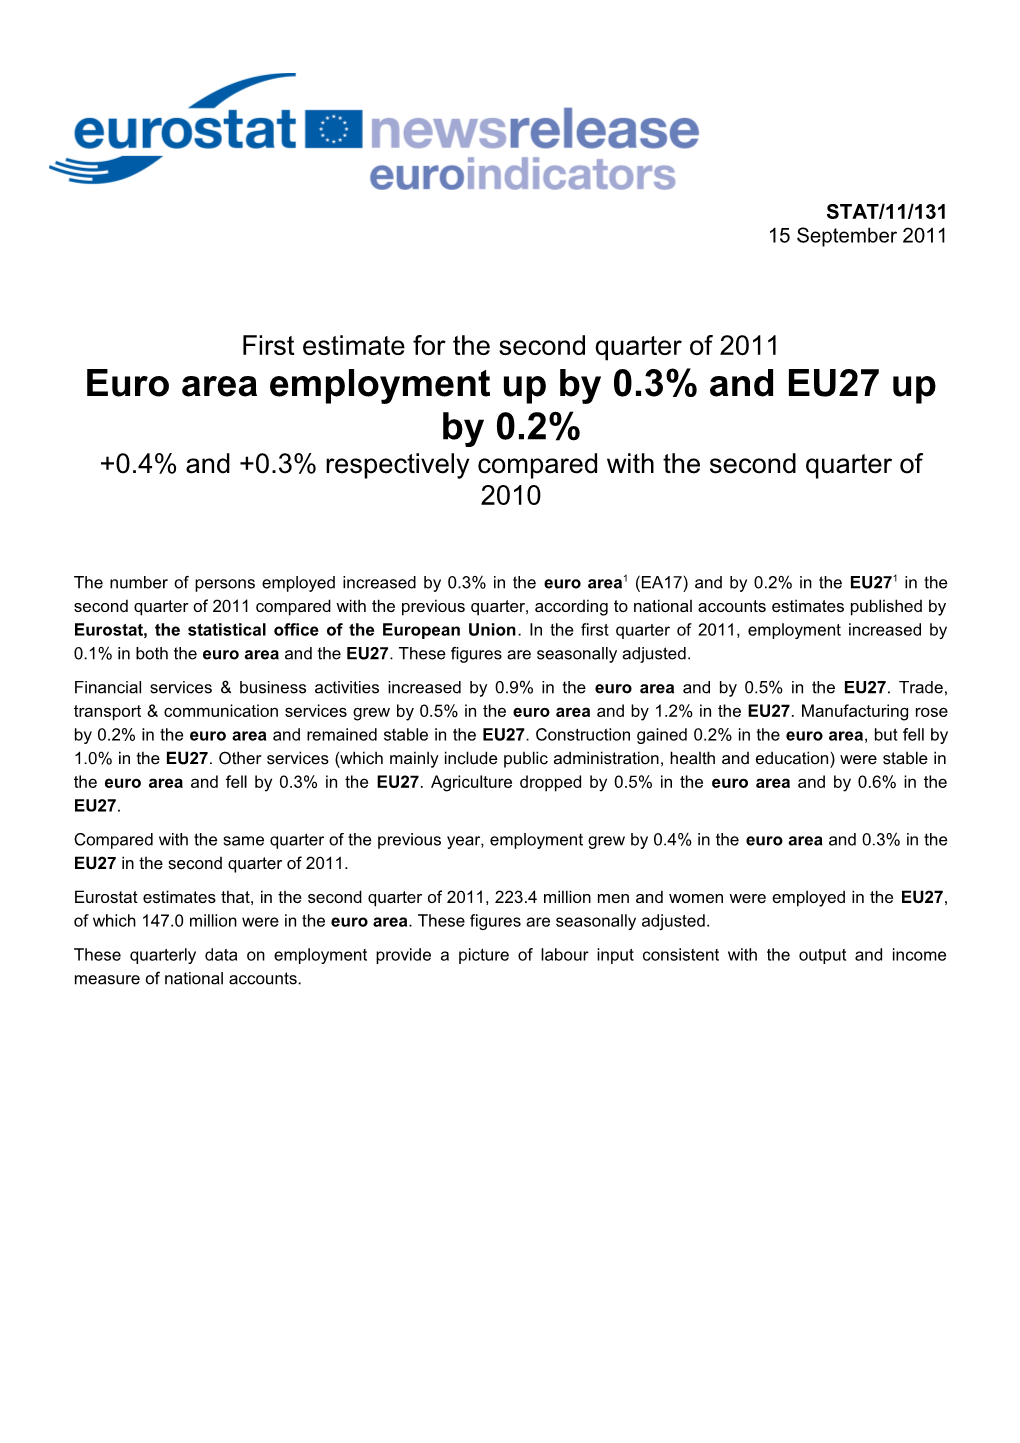 First Estimate for the Secondquarter of 2011 Euro Areaemployment up by 0.3% and EU27 Up